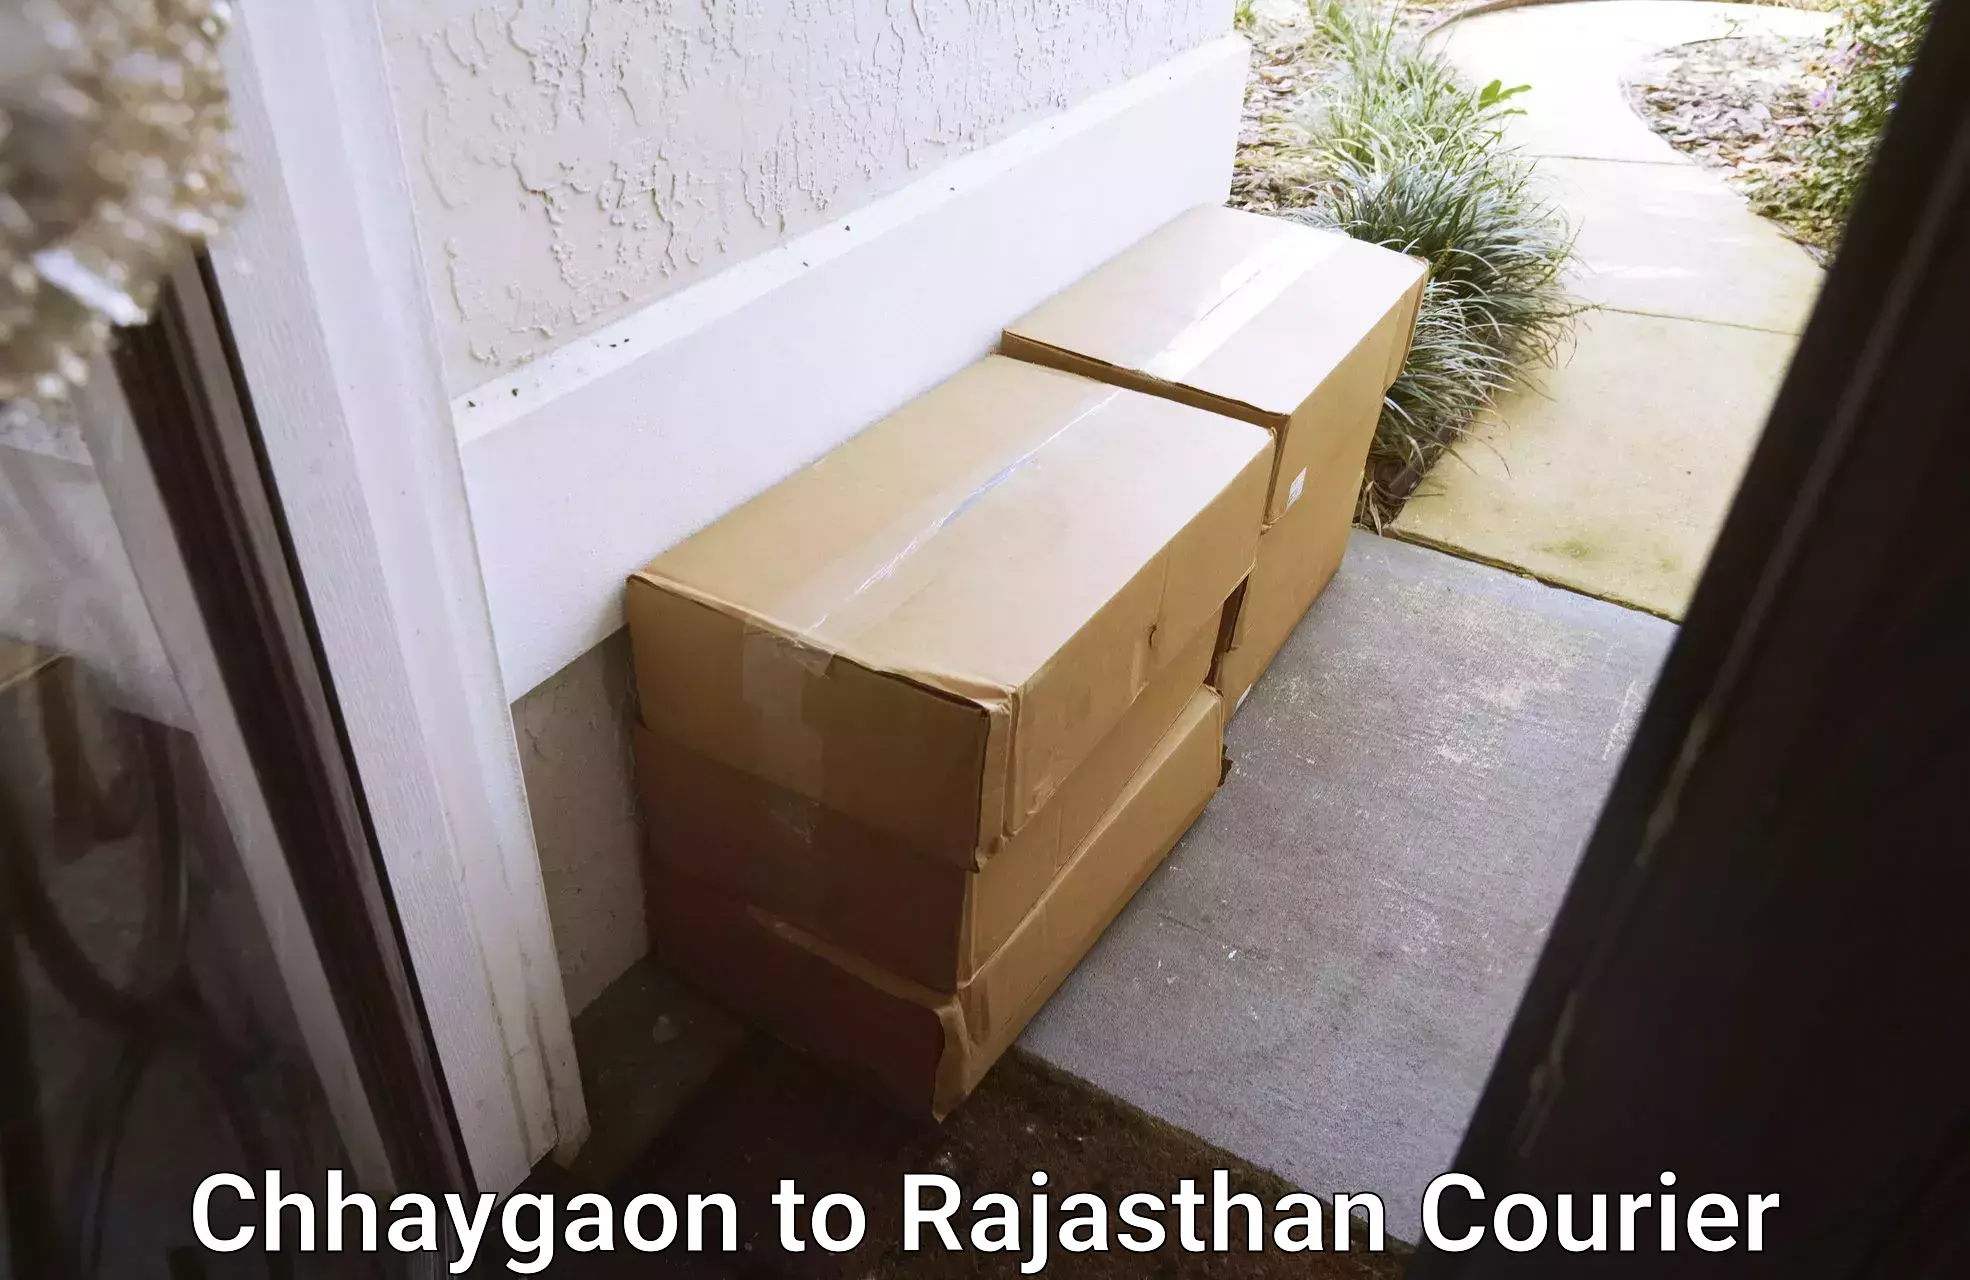 Nationwide delivery network Chhaygaon to Rajasthan